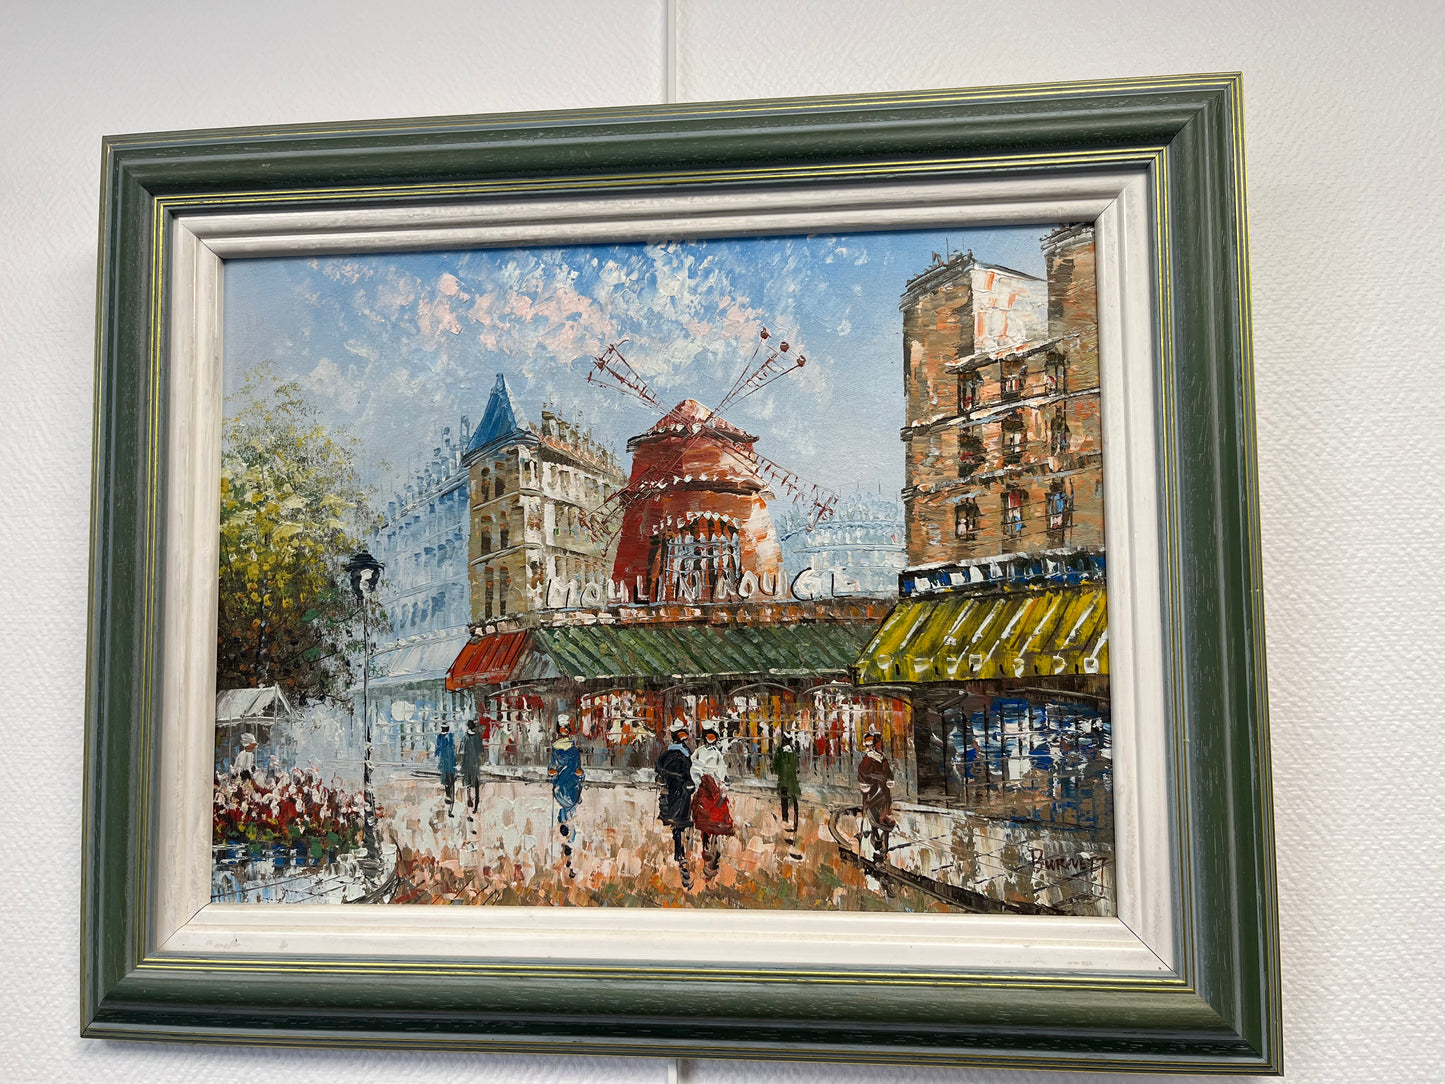 Burnett's painting view of the Moulin Rouge